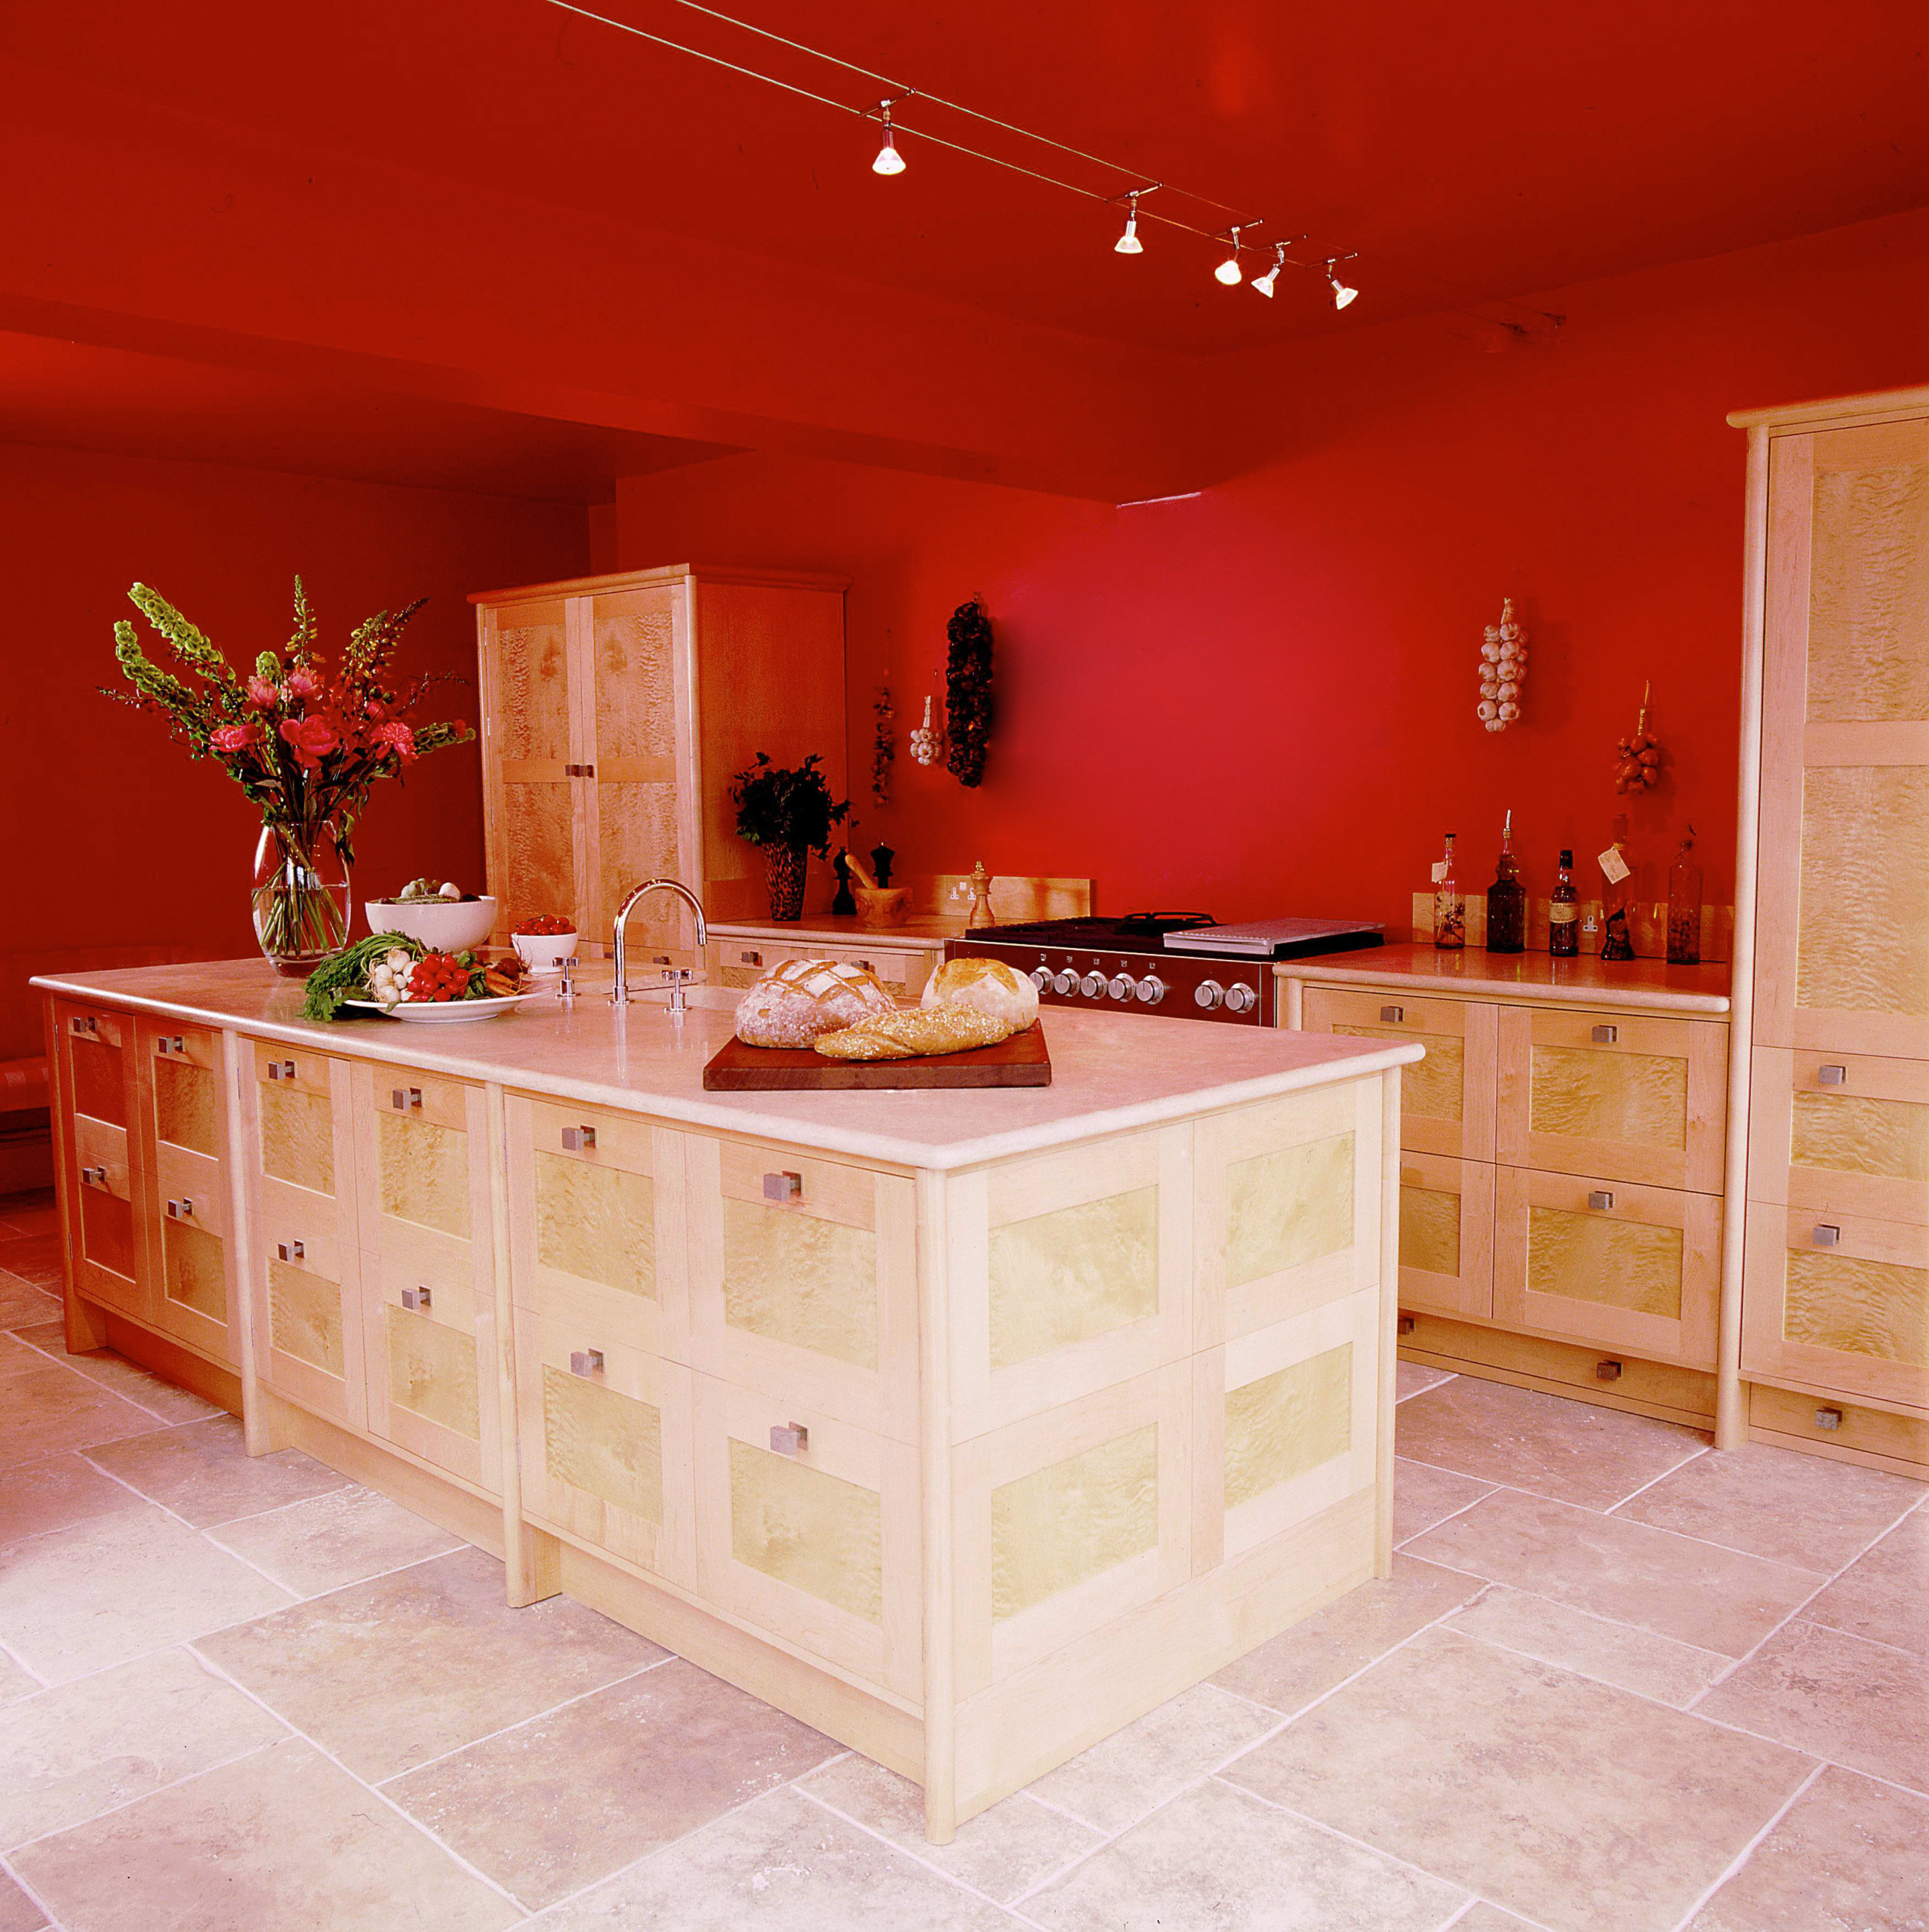 Quilted Maple Kitchen with Red Wall